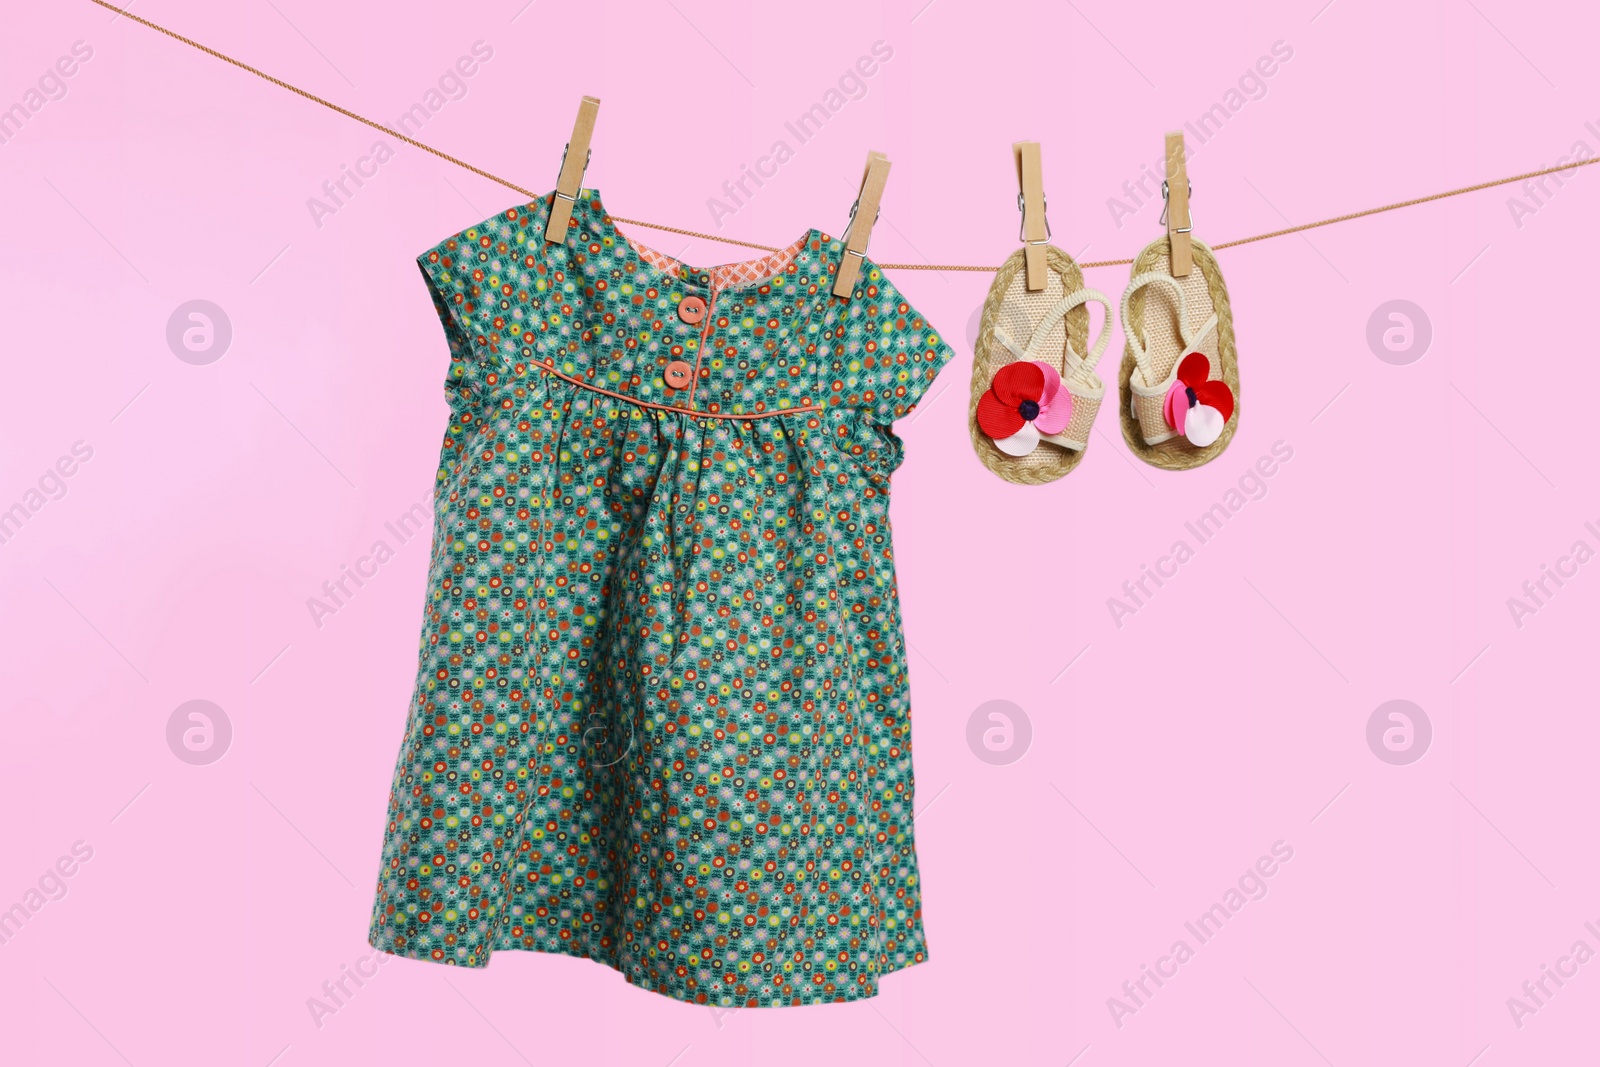 Photo of Cute baby dress and shoes drying on washing line against pink background